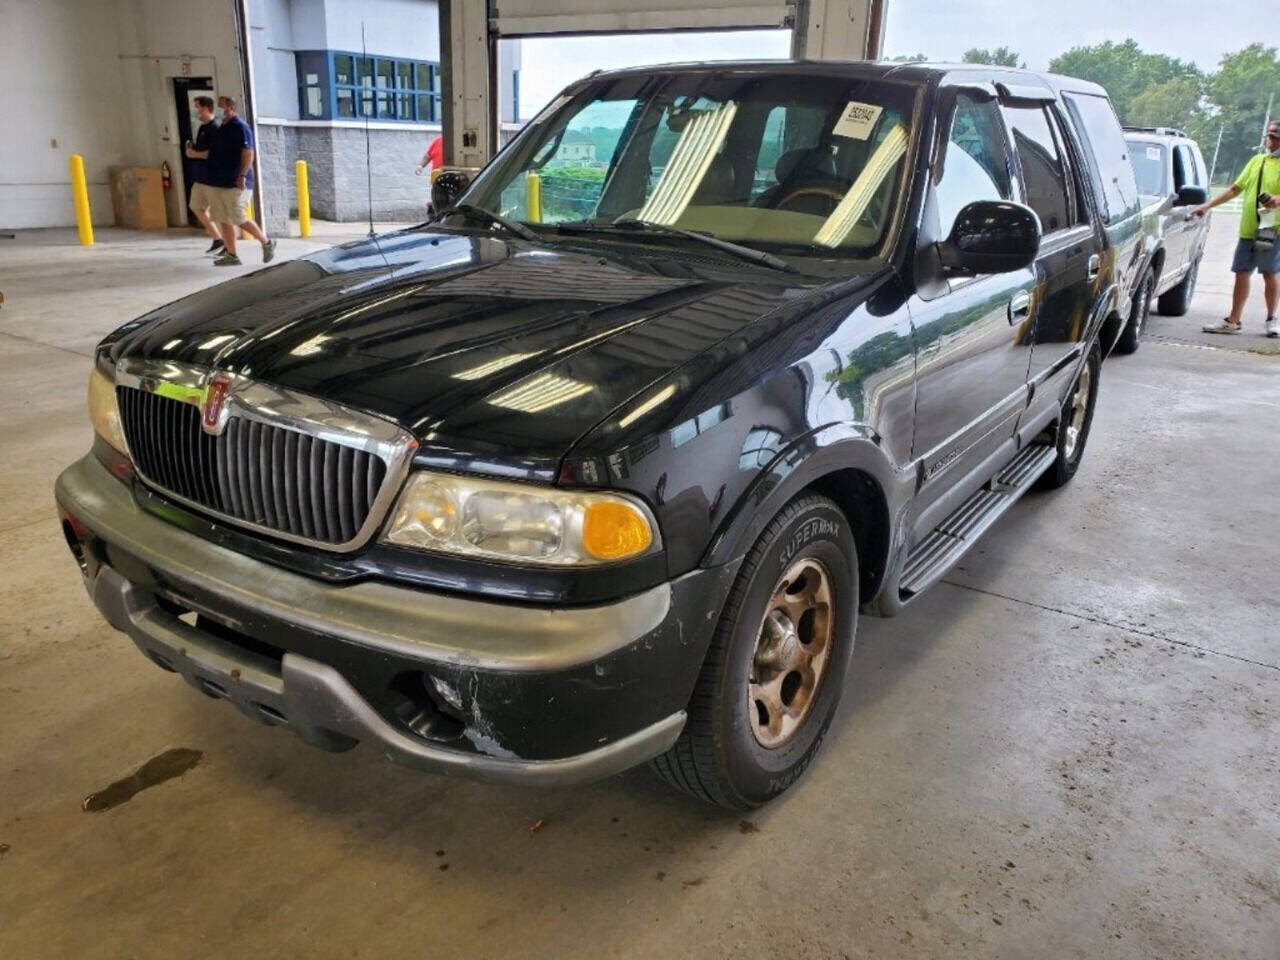 used 1998 lincoln navigator for sale carsforsale com used 1998 lincoln navigator for sale